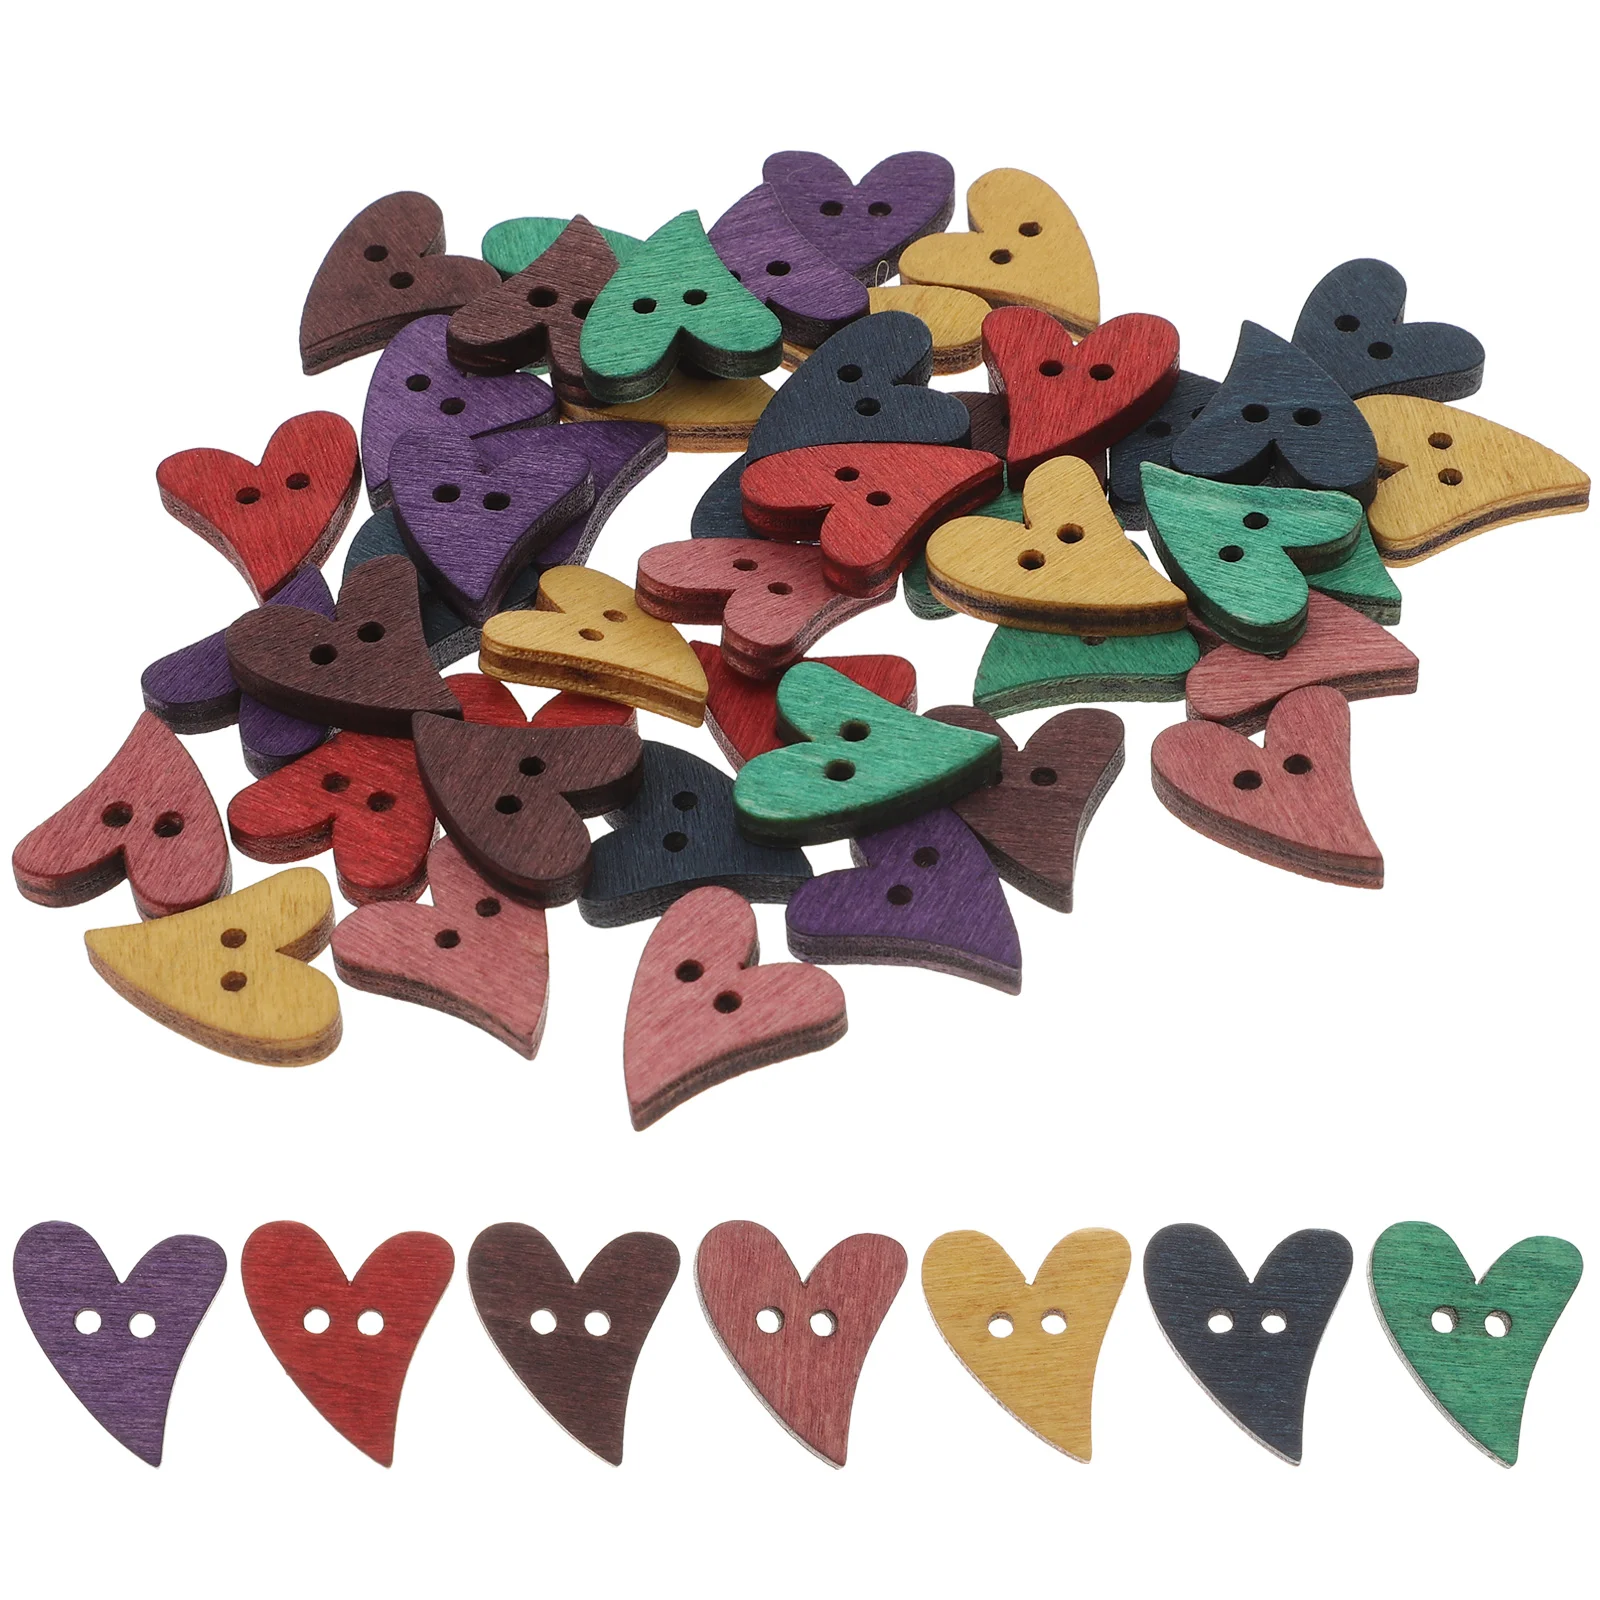 

100 Pcs Handmade Wooden Button Small Wooden Button Labels Clothes Wooden Hearts Craft Hand Decor Heart-shaped Wood Heart Shapes